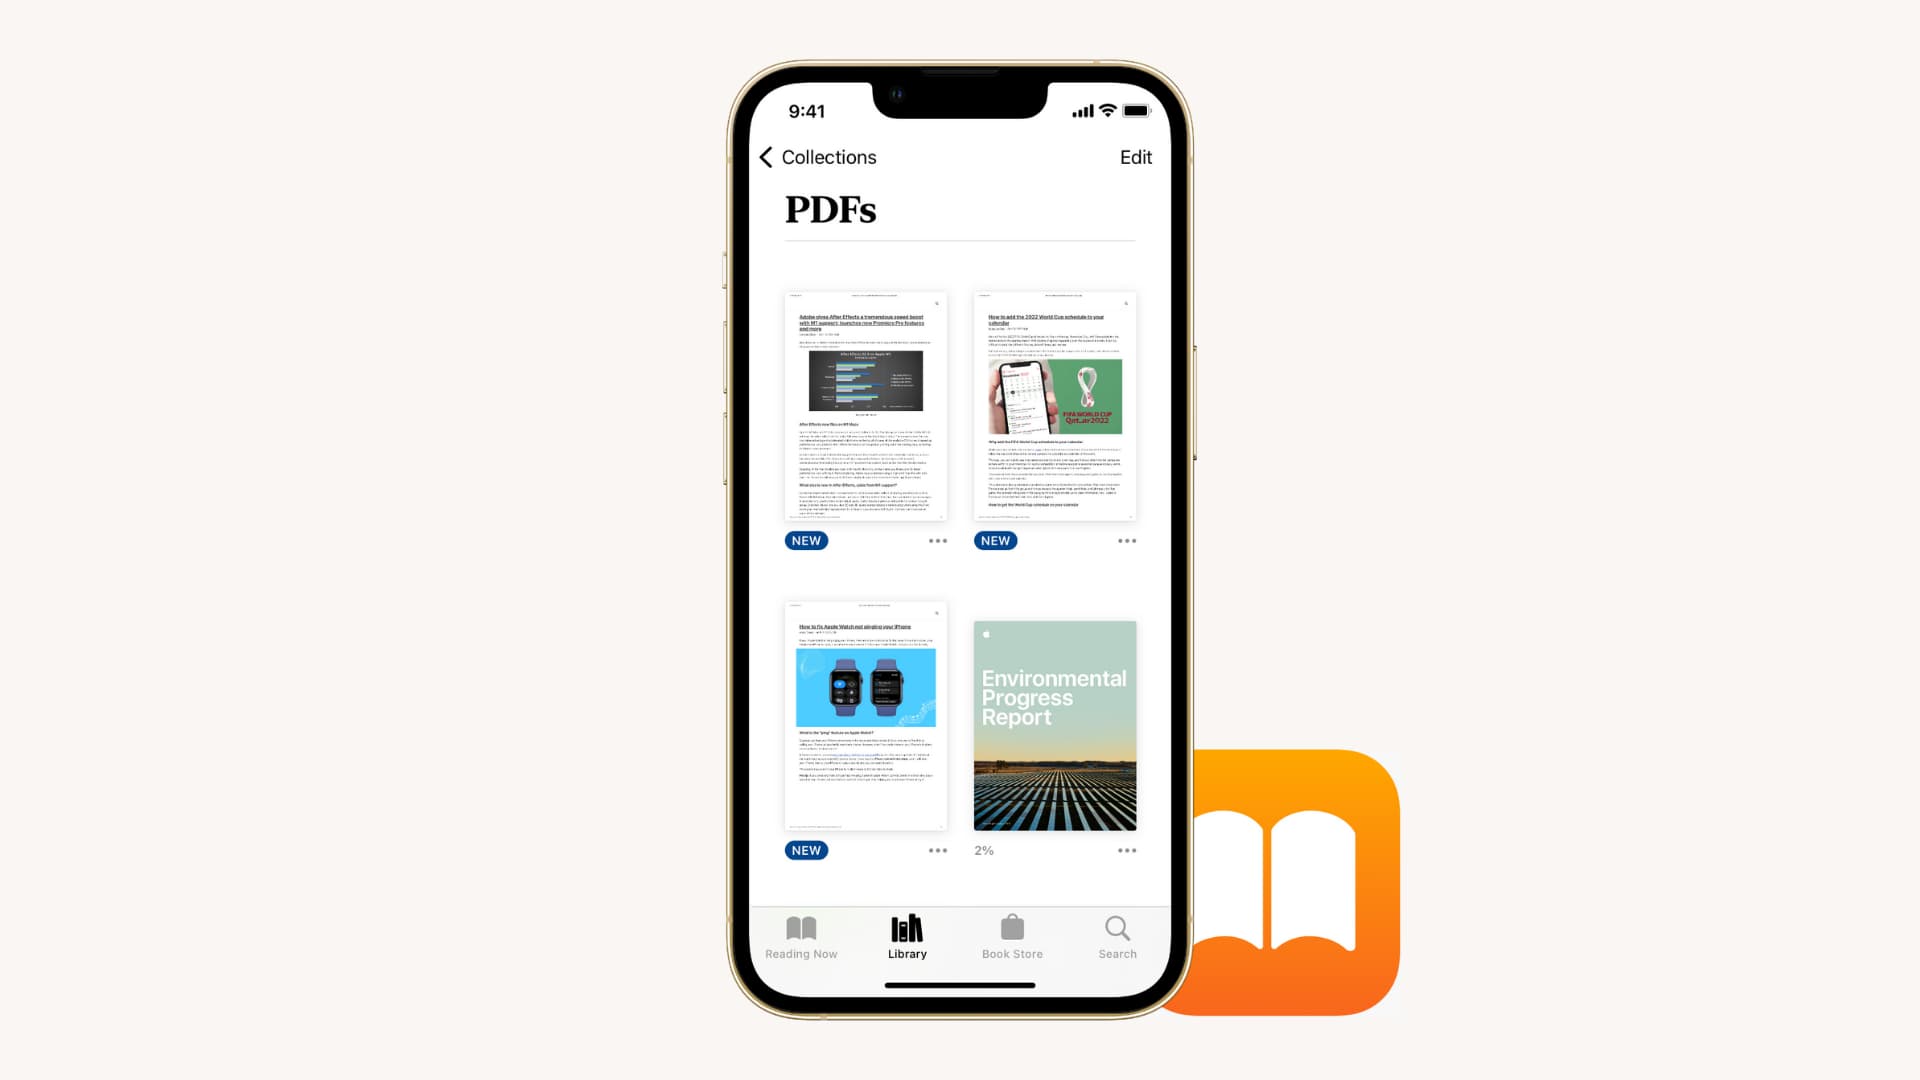 How to save PDF to Books app on iPhone